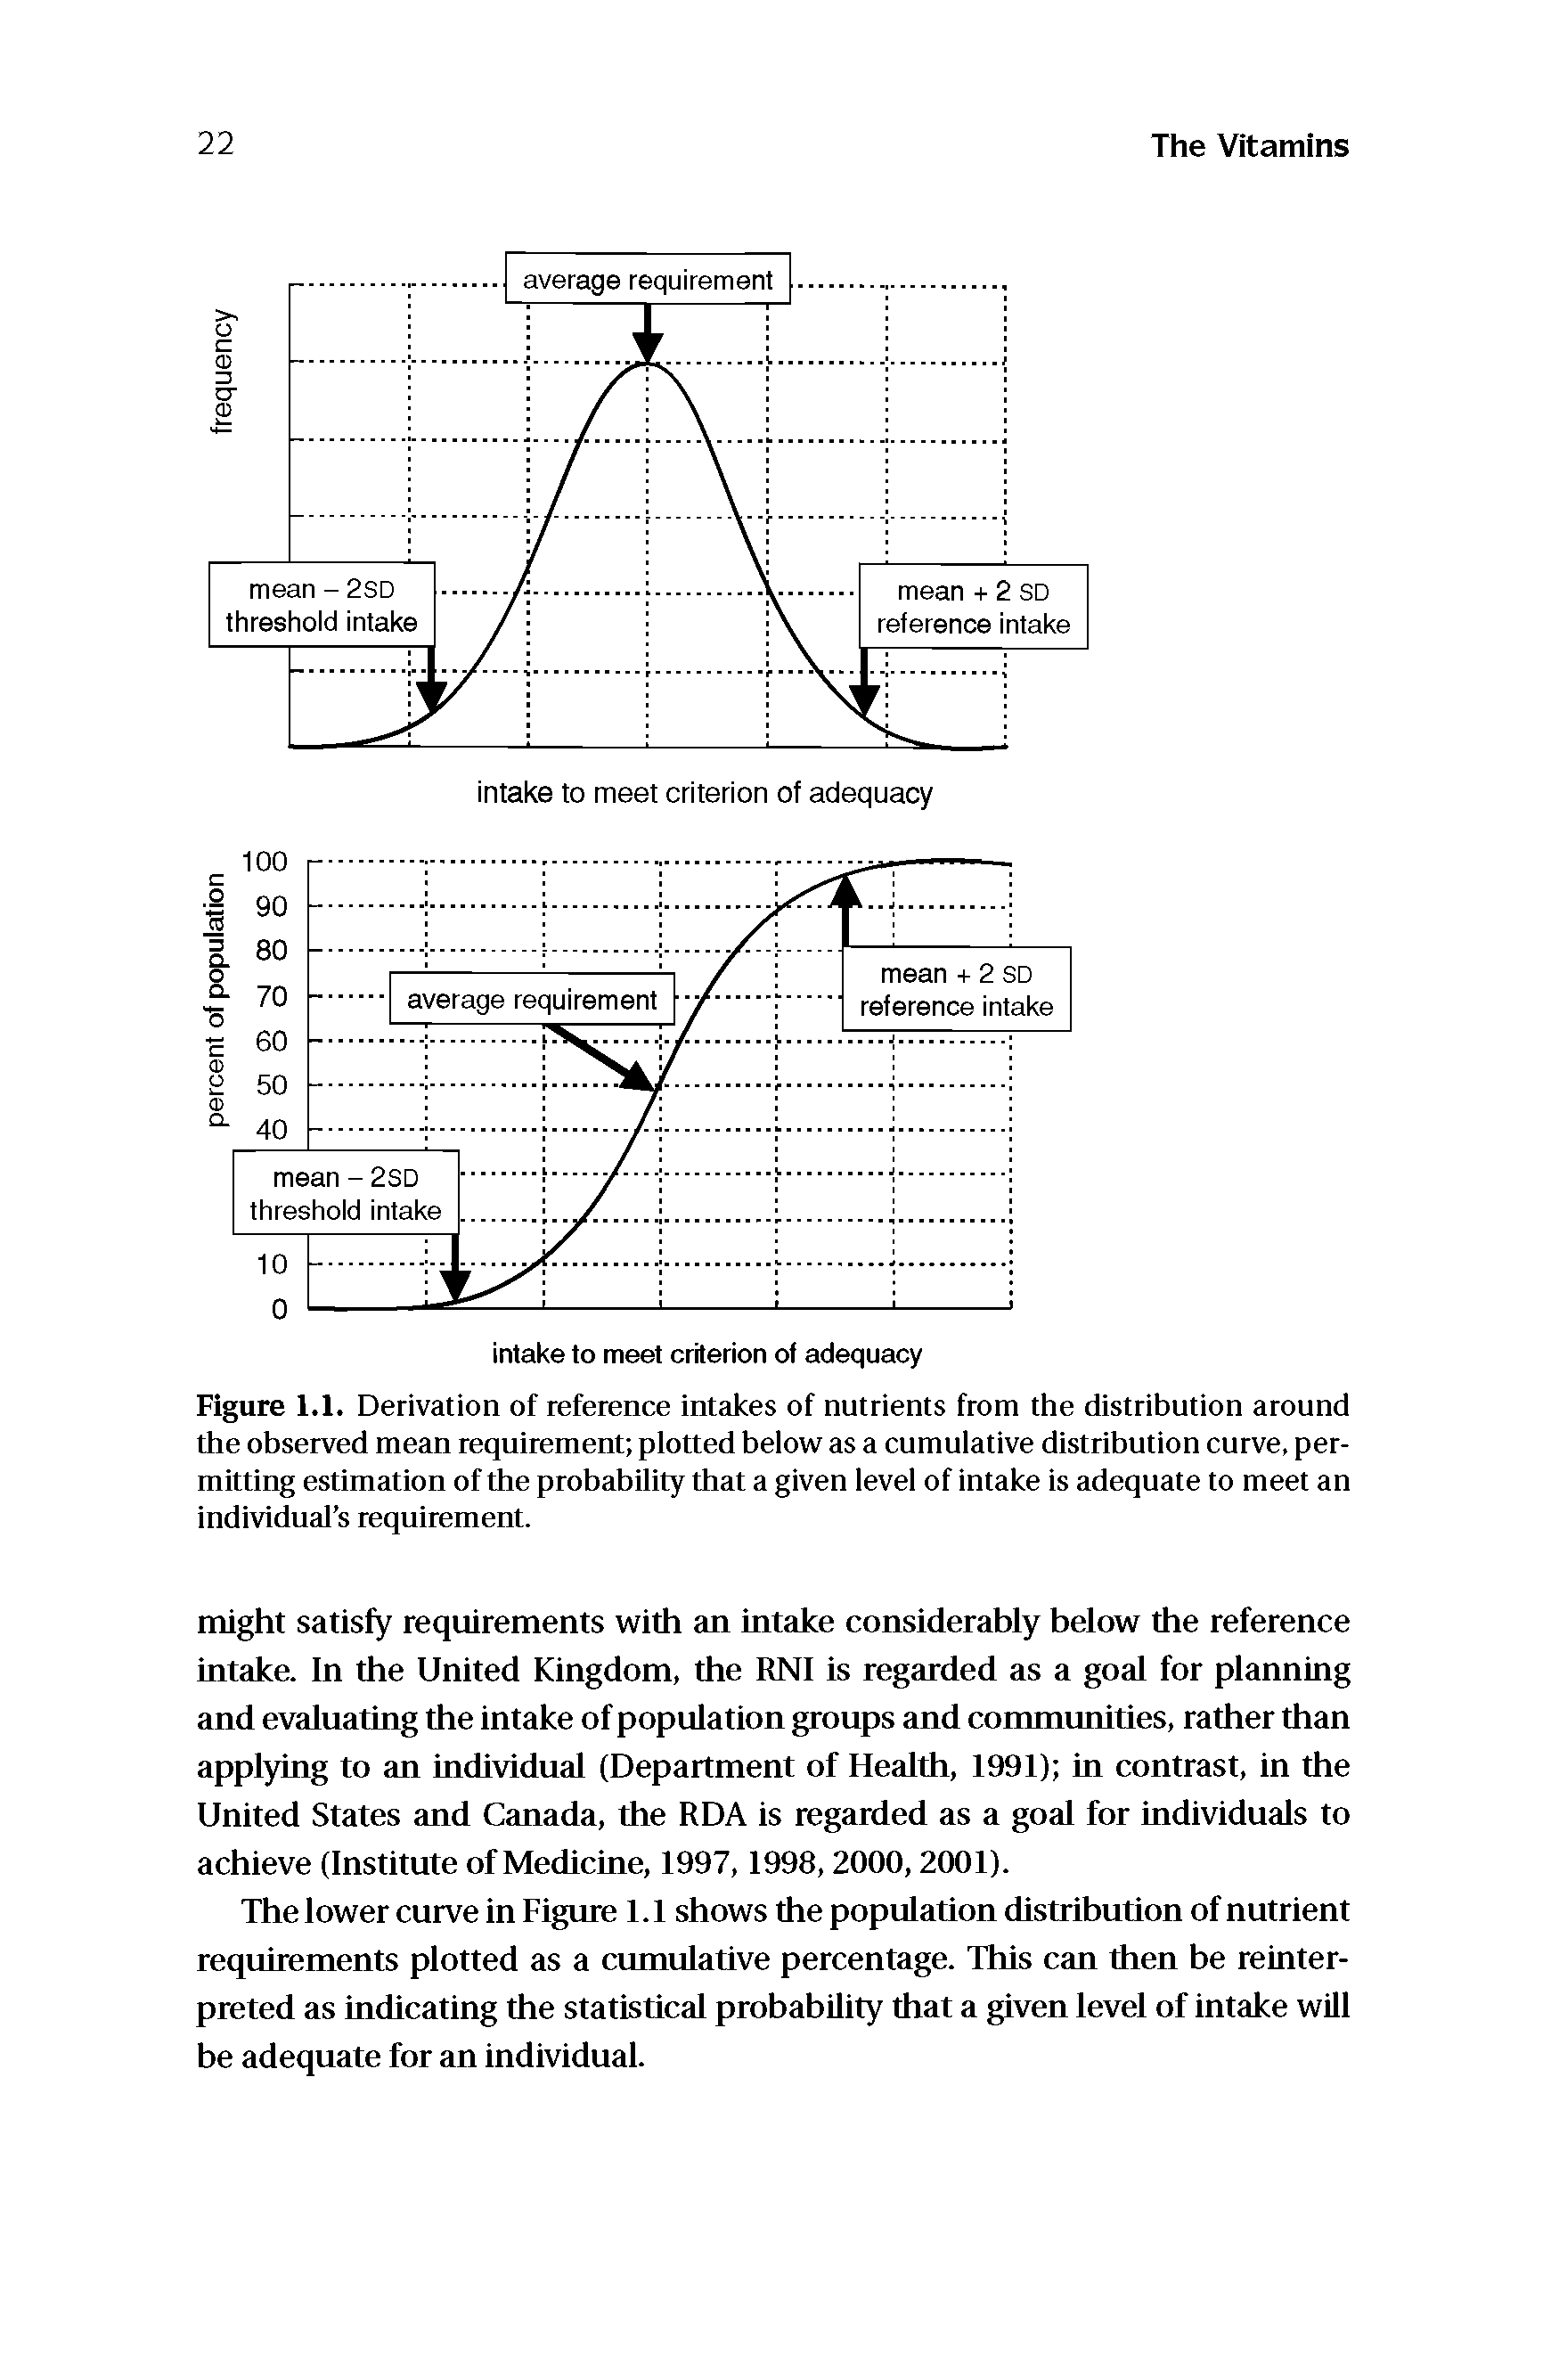 Figure 1.1. Derivation of reference intakes of nutrients from the distribution around the observed mean requirement plotted below as a cumulative distribution curve, permitting estimation of the probability that a given level of intake is adequate to meet an individual s requirement.